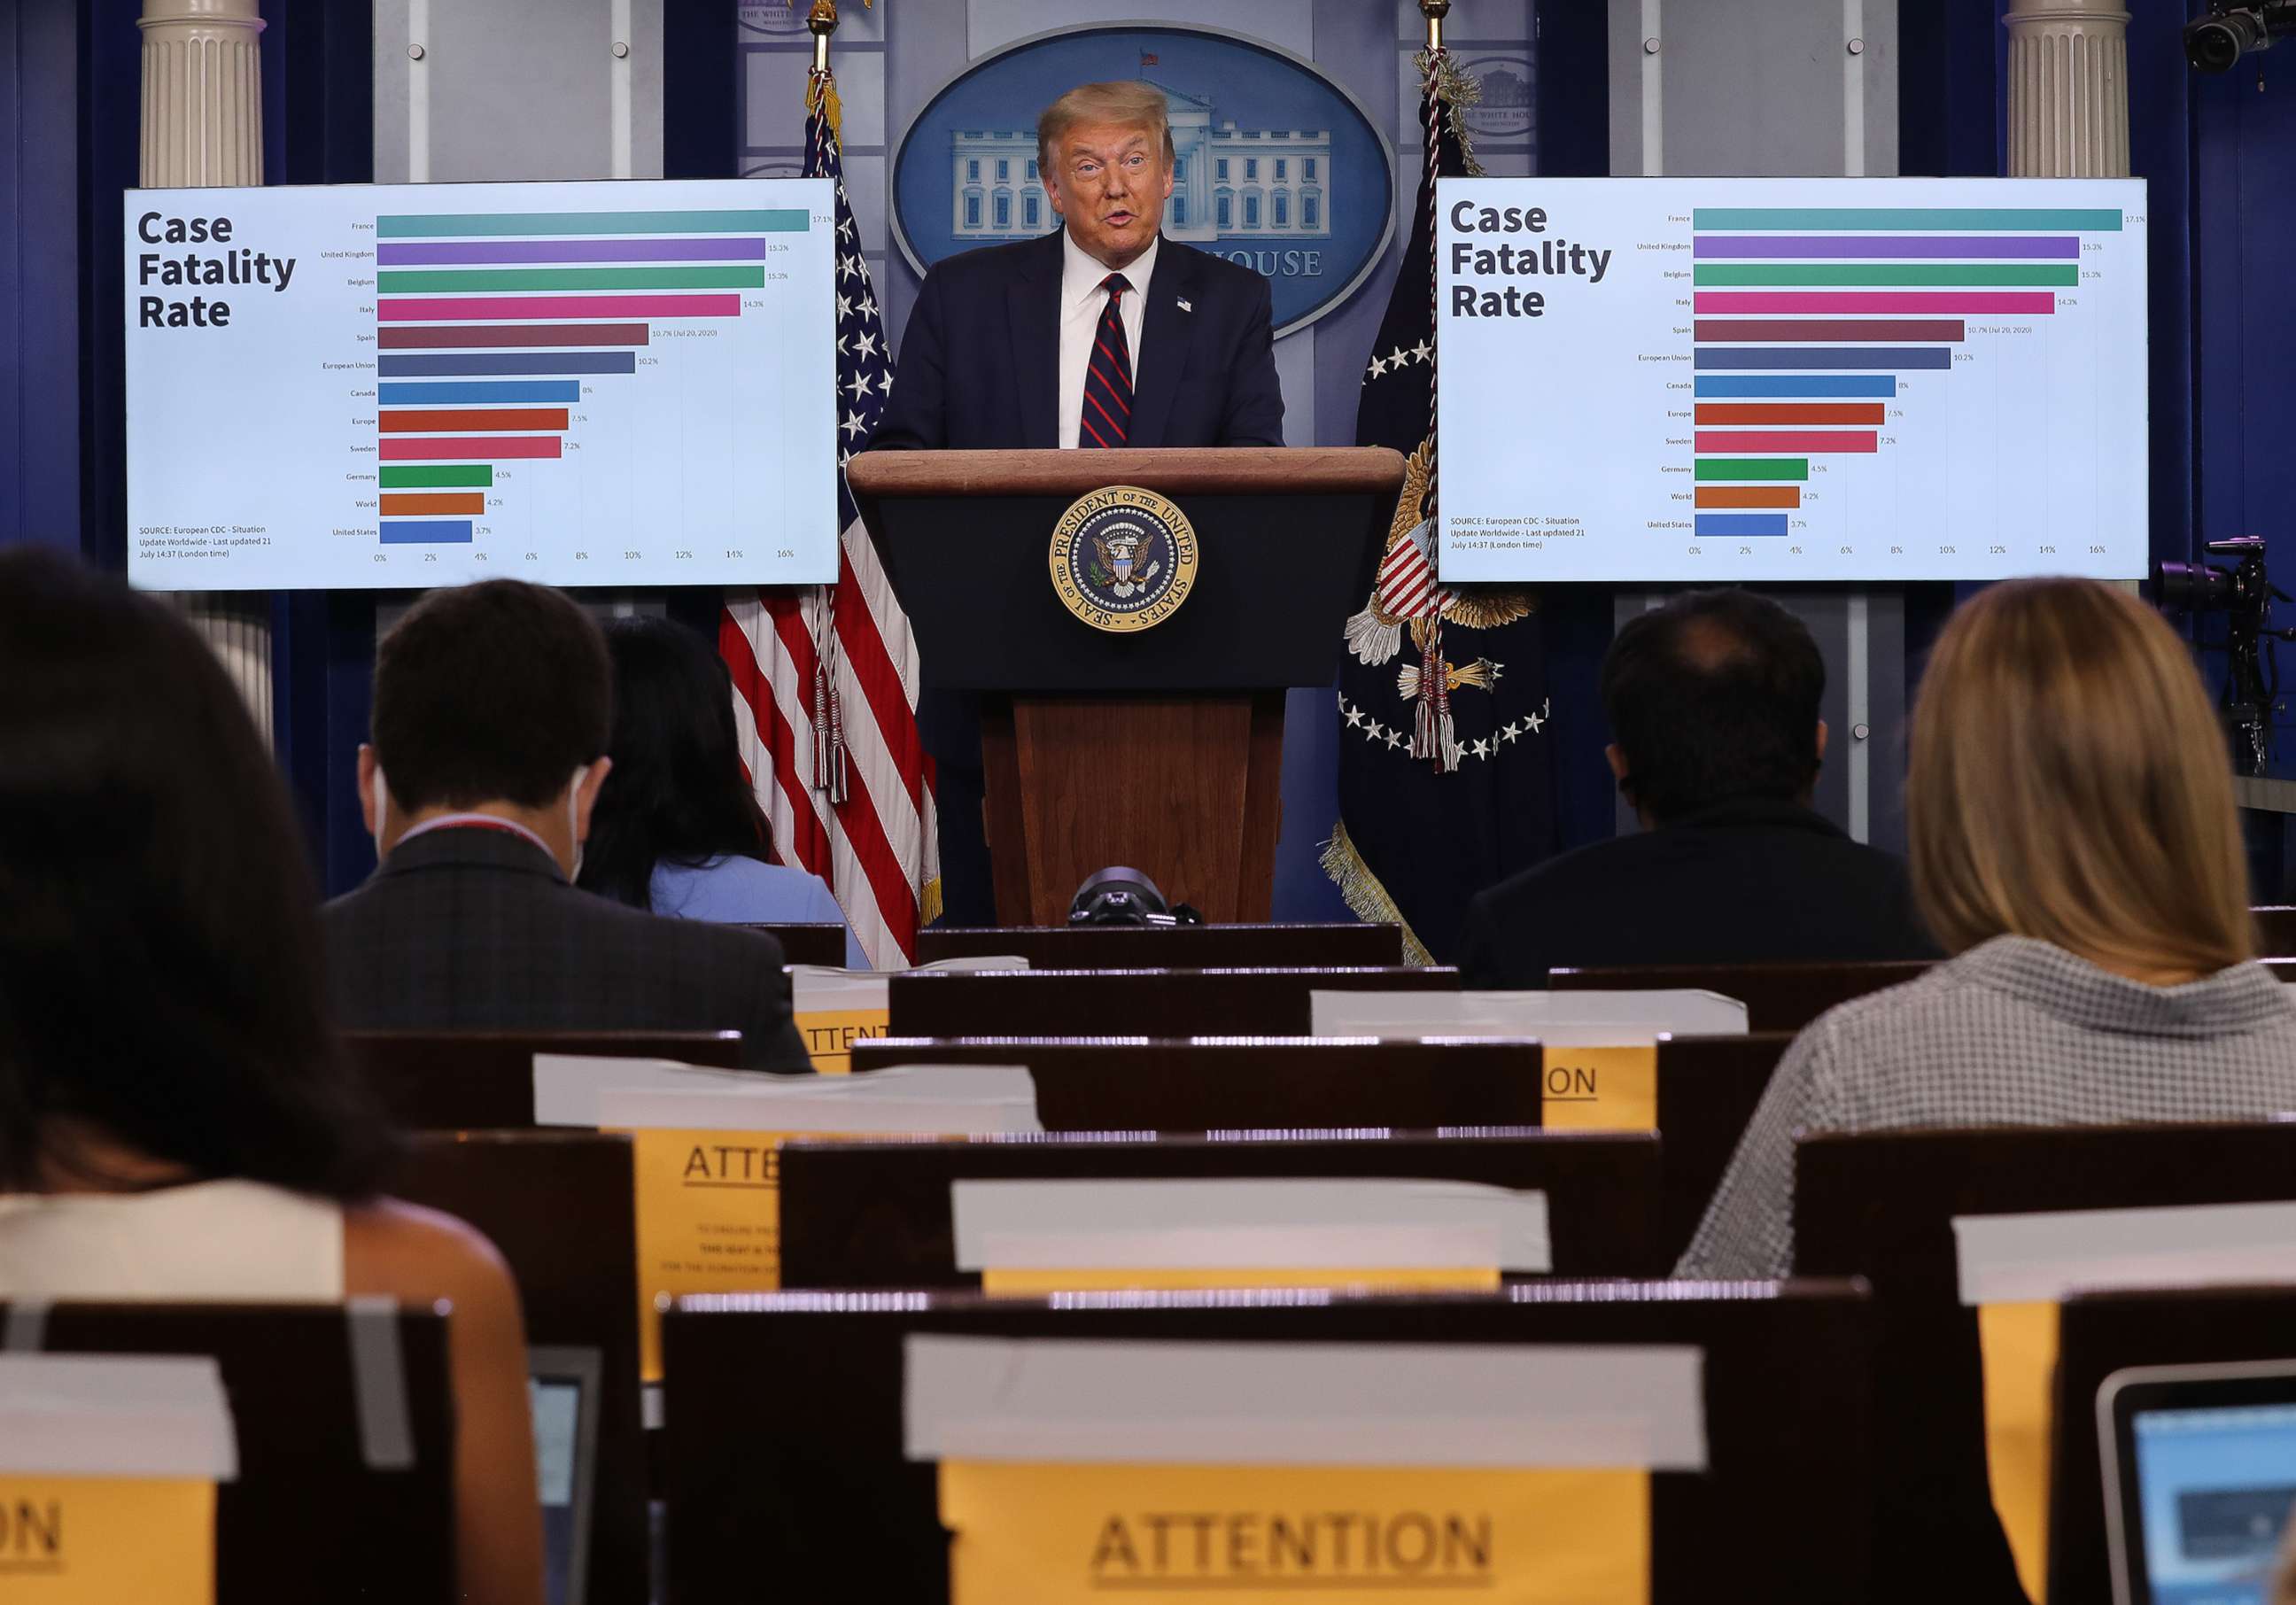 PHOTO: In this July 21, 2020, file photo, President Donald Trump speaks to reporters during a news conference in the Brady Press Briefing Room at the White House in Washington, DC.